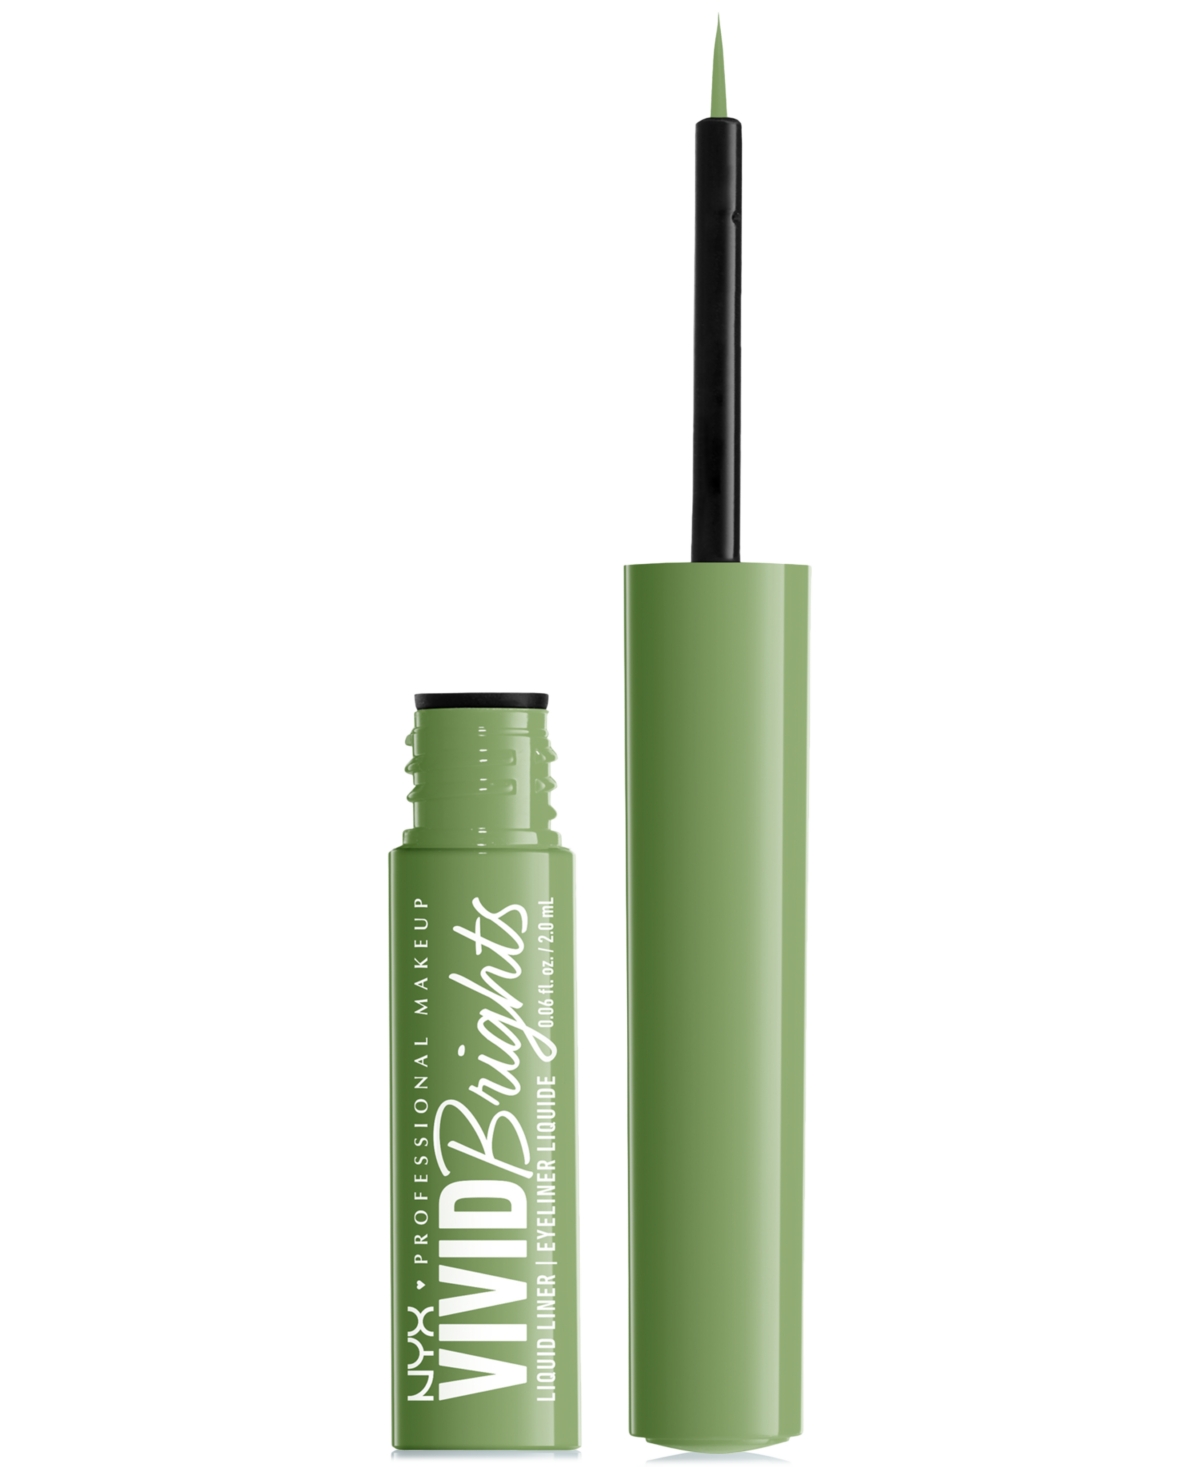 Nyx Professional Makeup Vivid Brights Liquid Liner In Ghosted Green